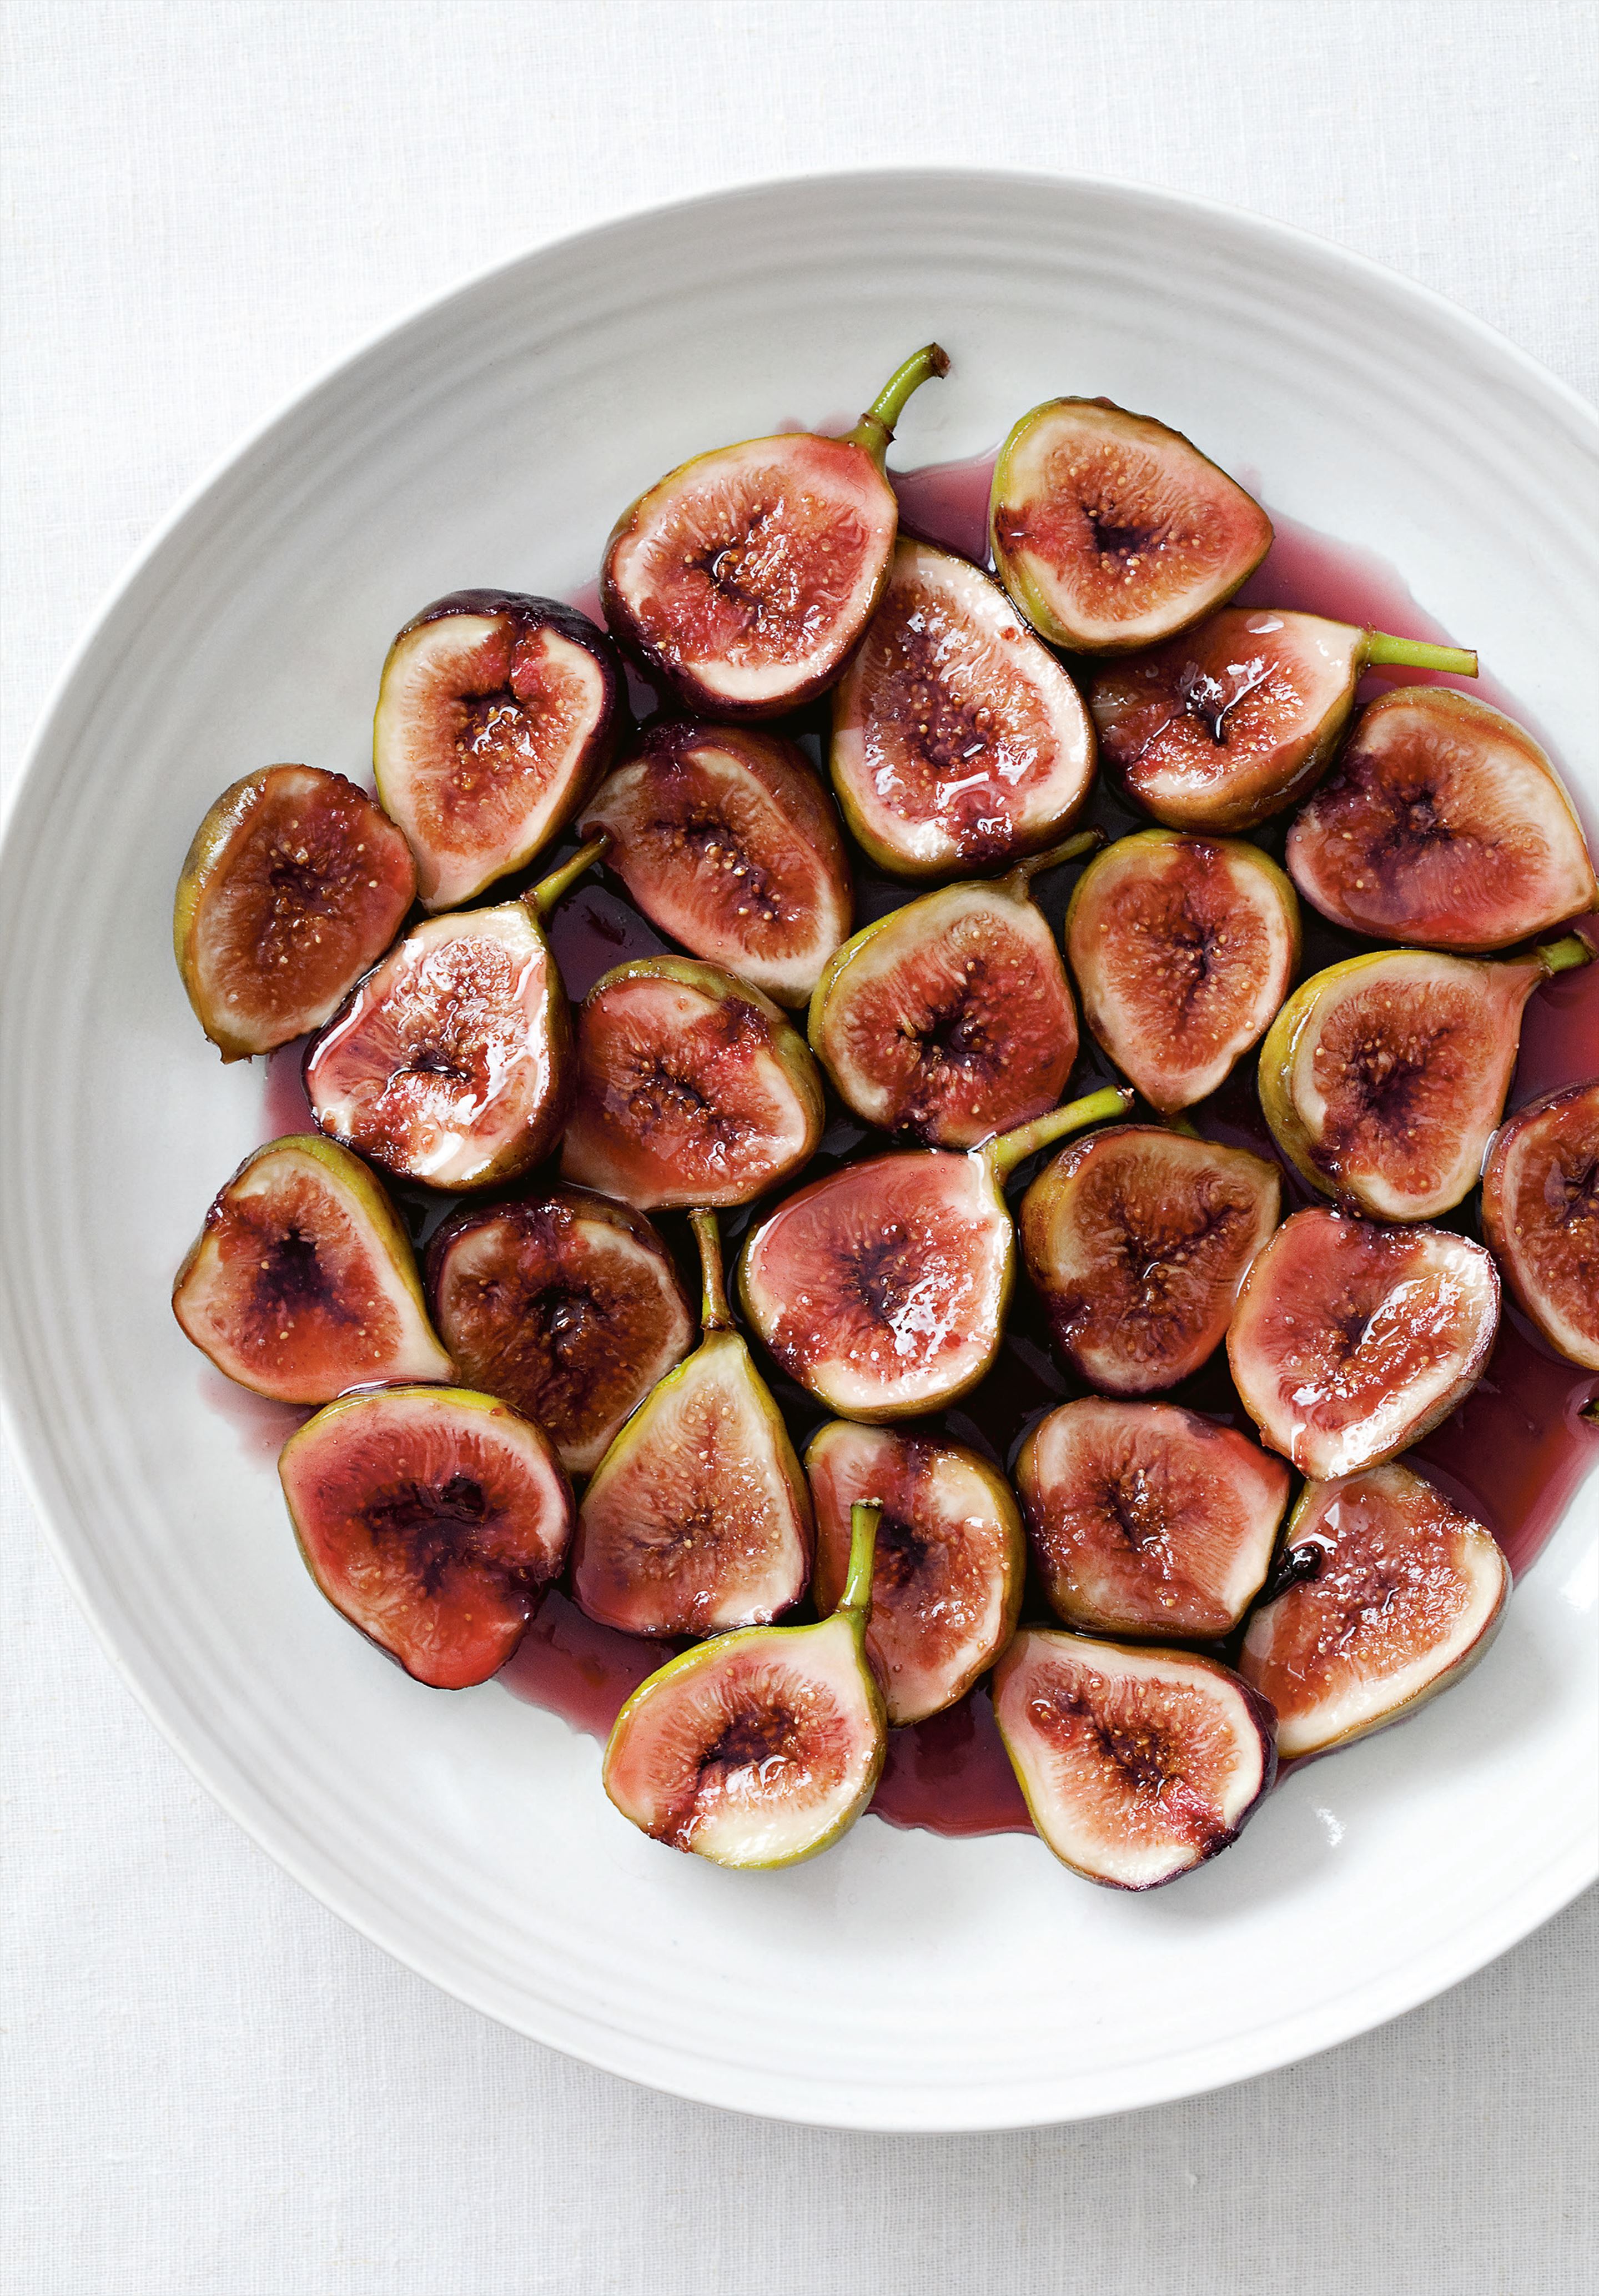 Figs poached in wine